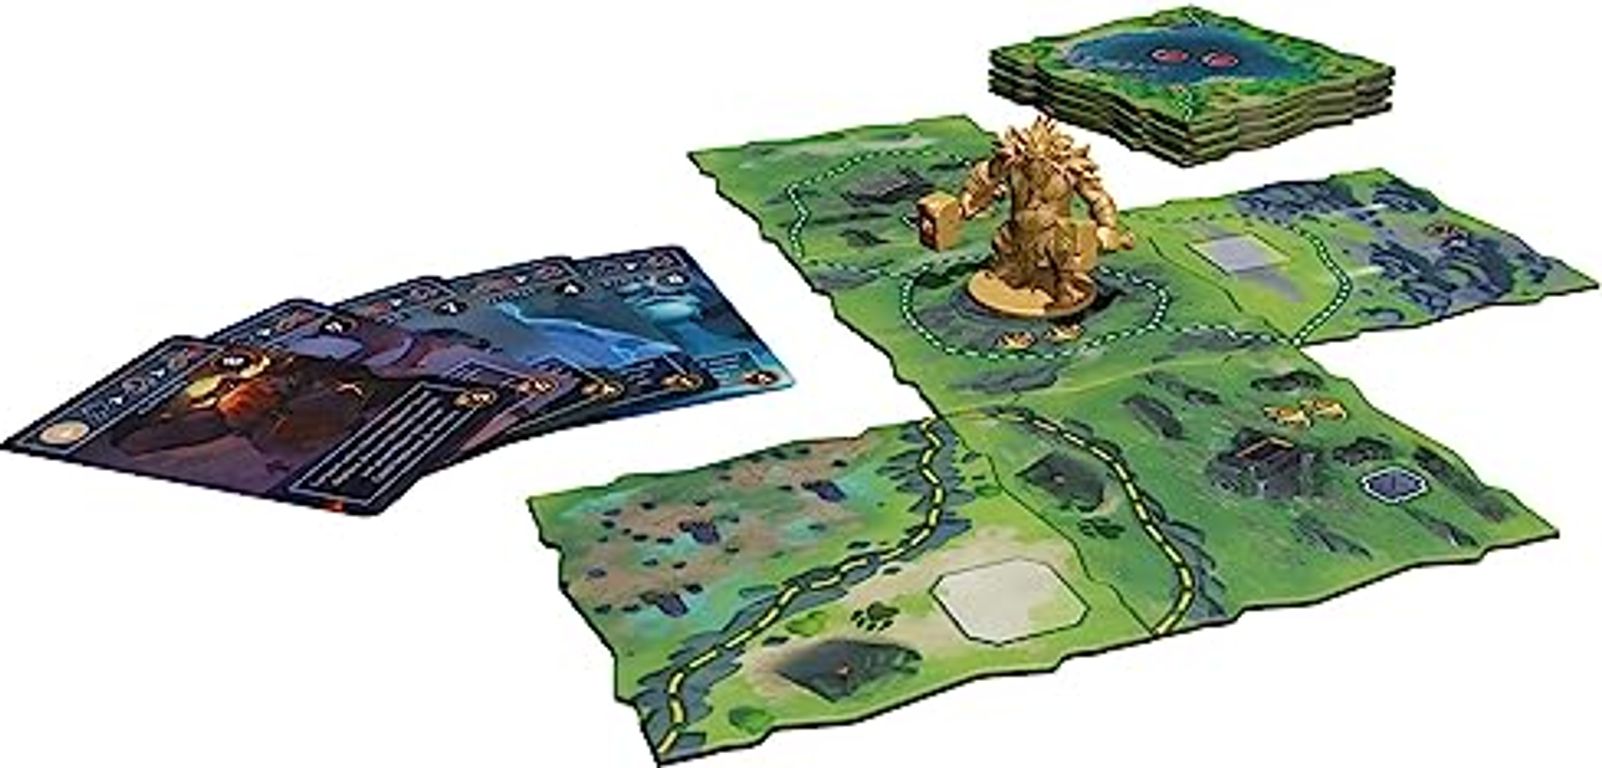 Northgard: Uncharted Lands – Wilderness Expansion components